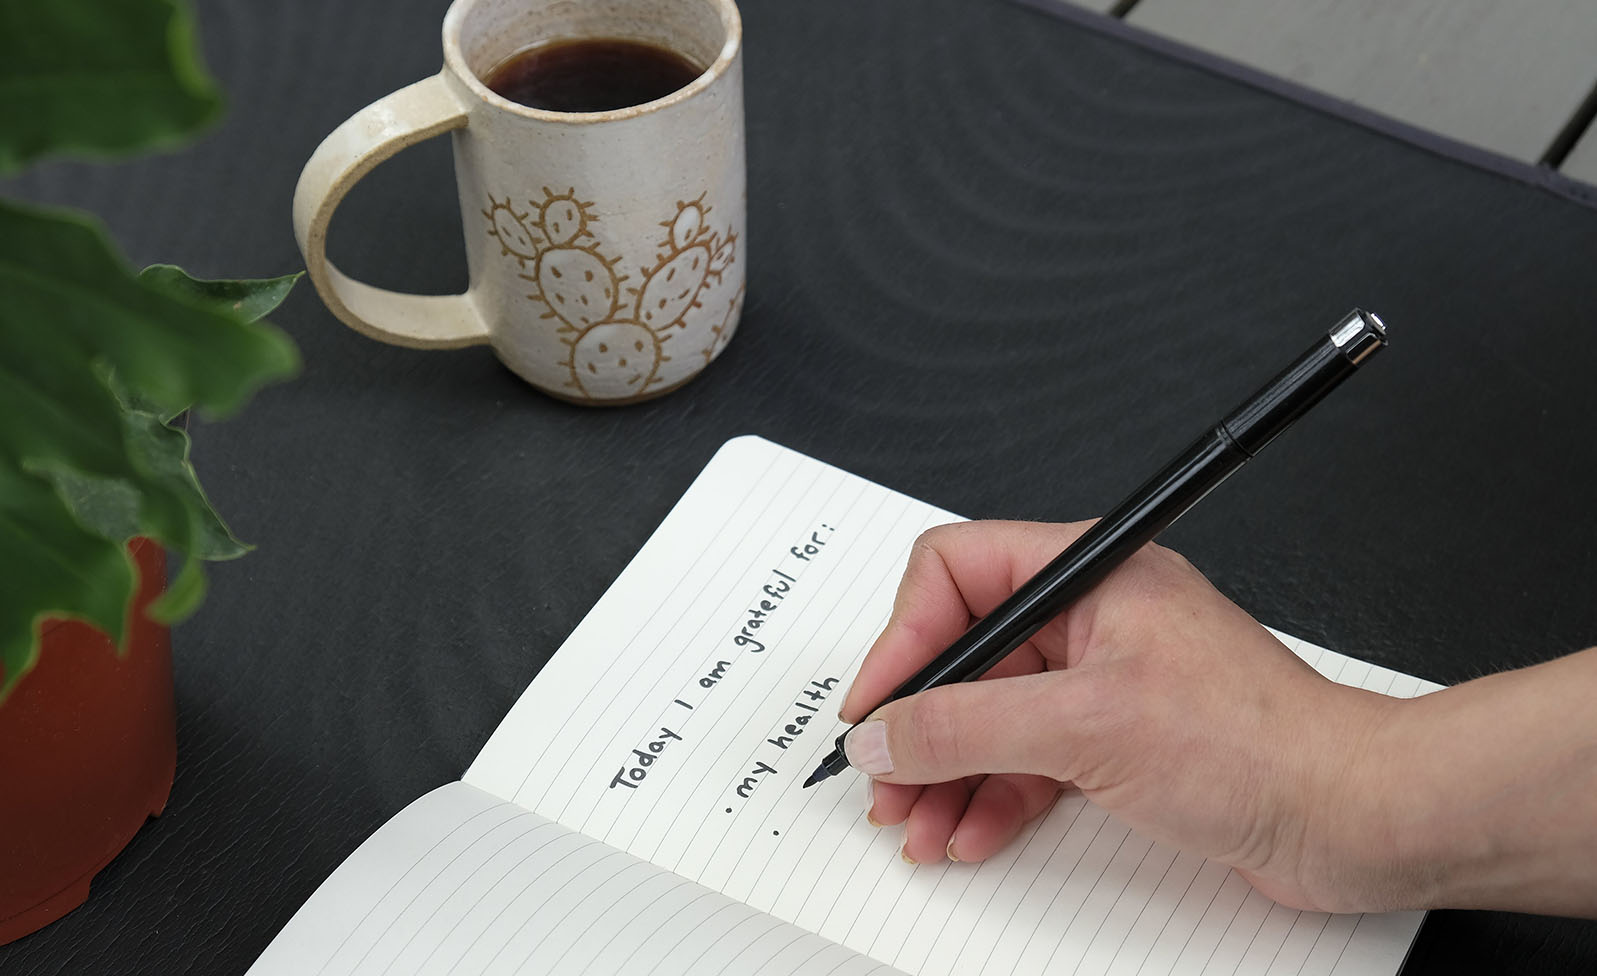 A close up of a hand writing in a journal with a mug nearby